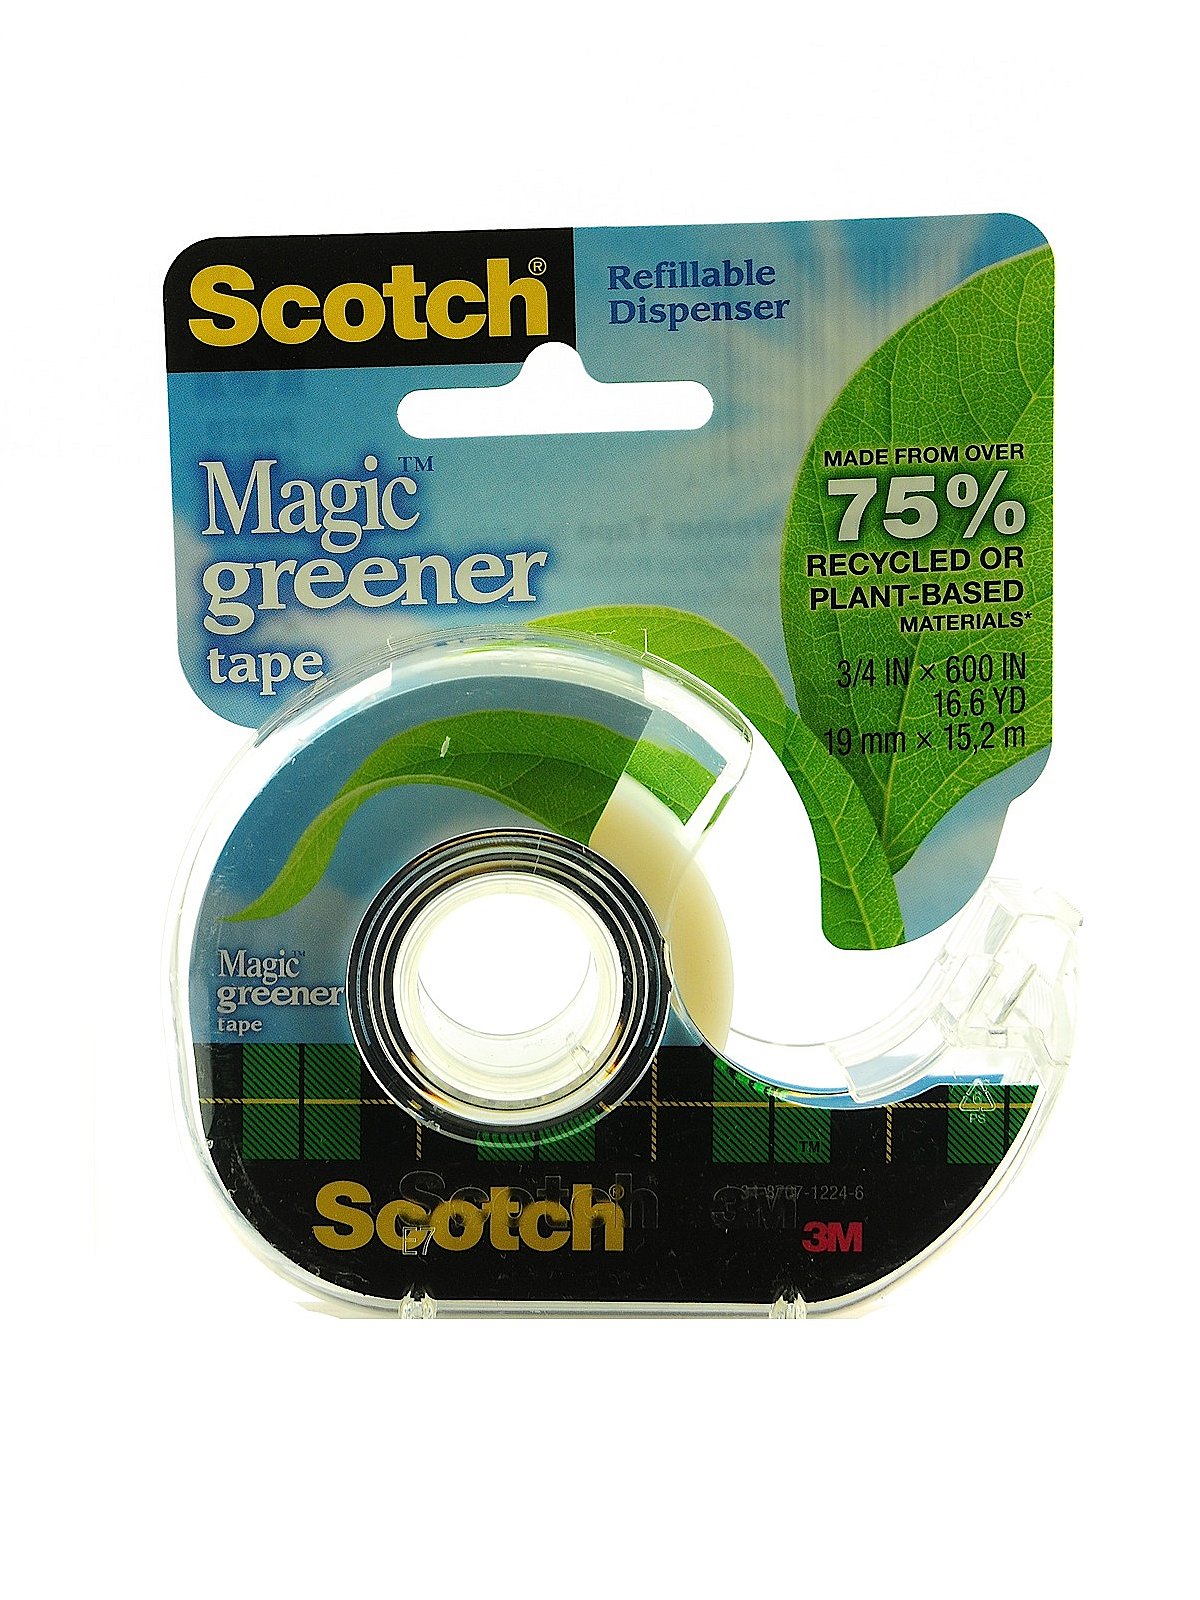 3M Scotch Magic Tape Roll with Refillable Dispenser